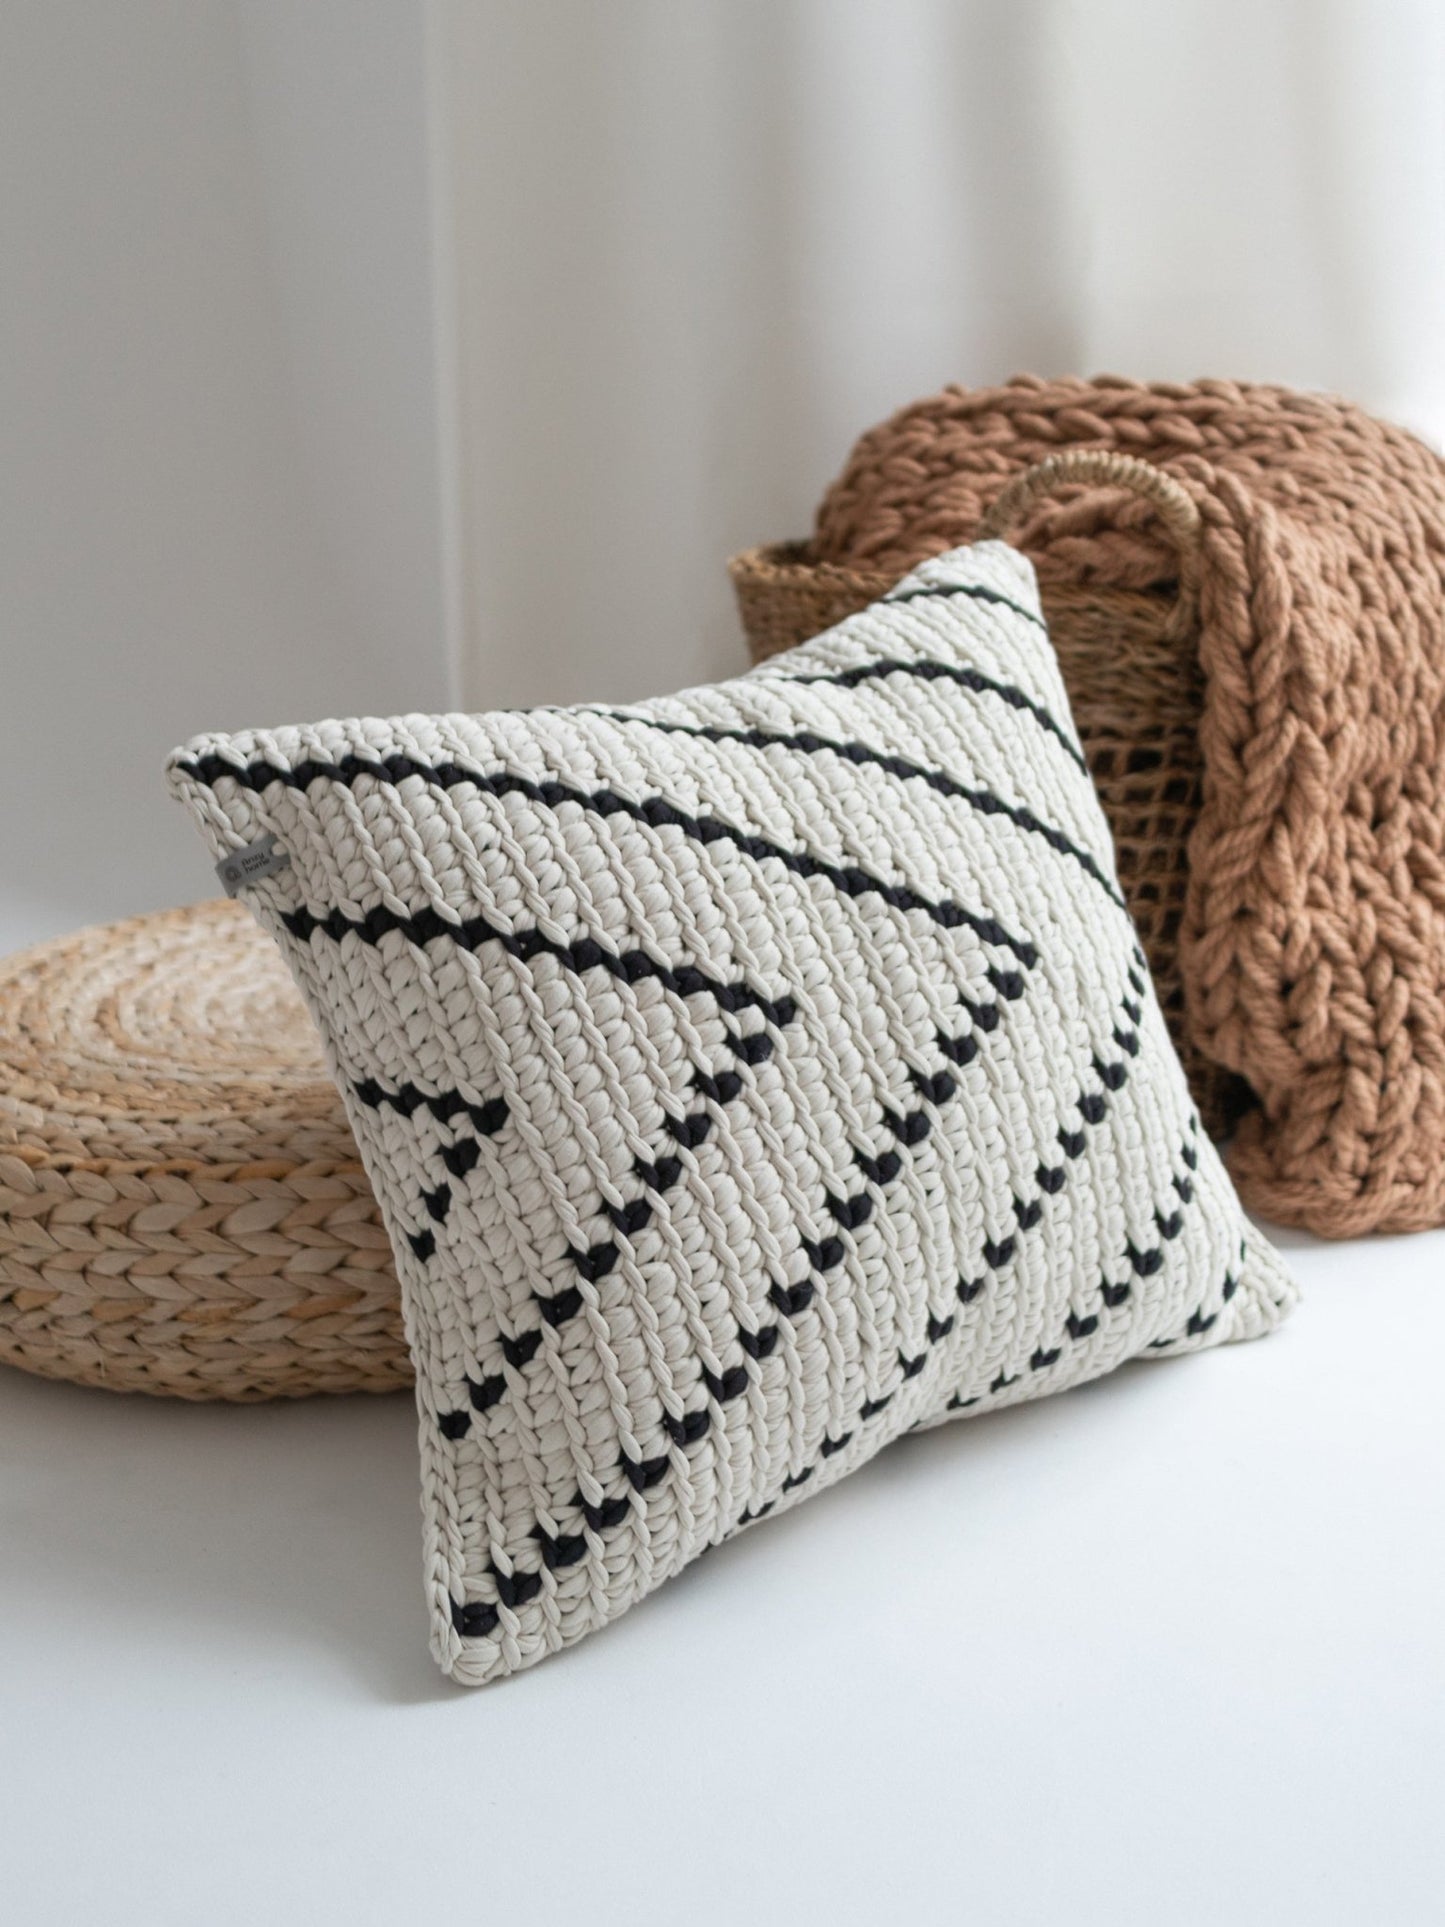 PATTERNED HANDKNIT PILLOW IVORY AND BLACK 20” - The Modern Heritage